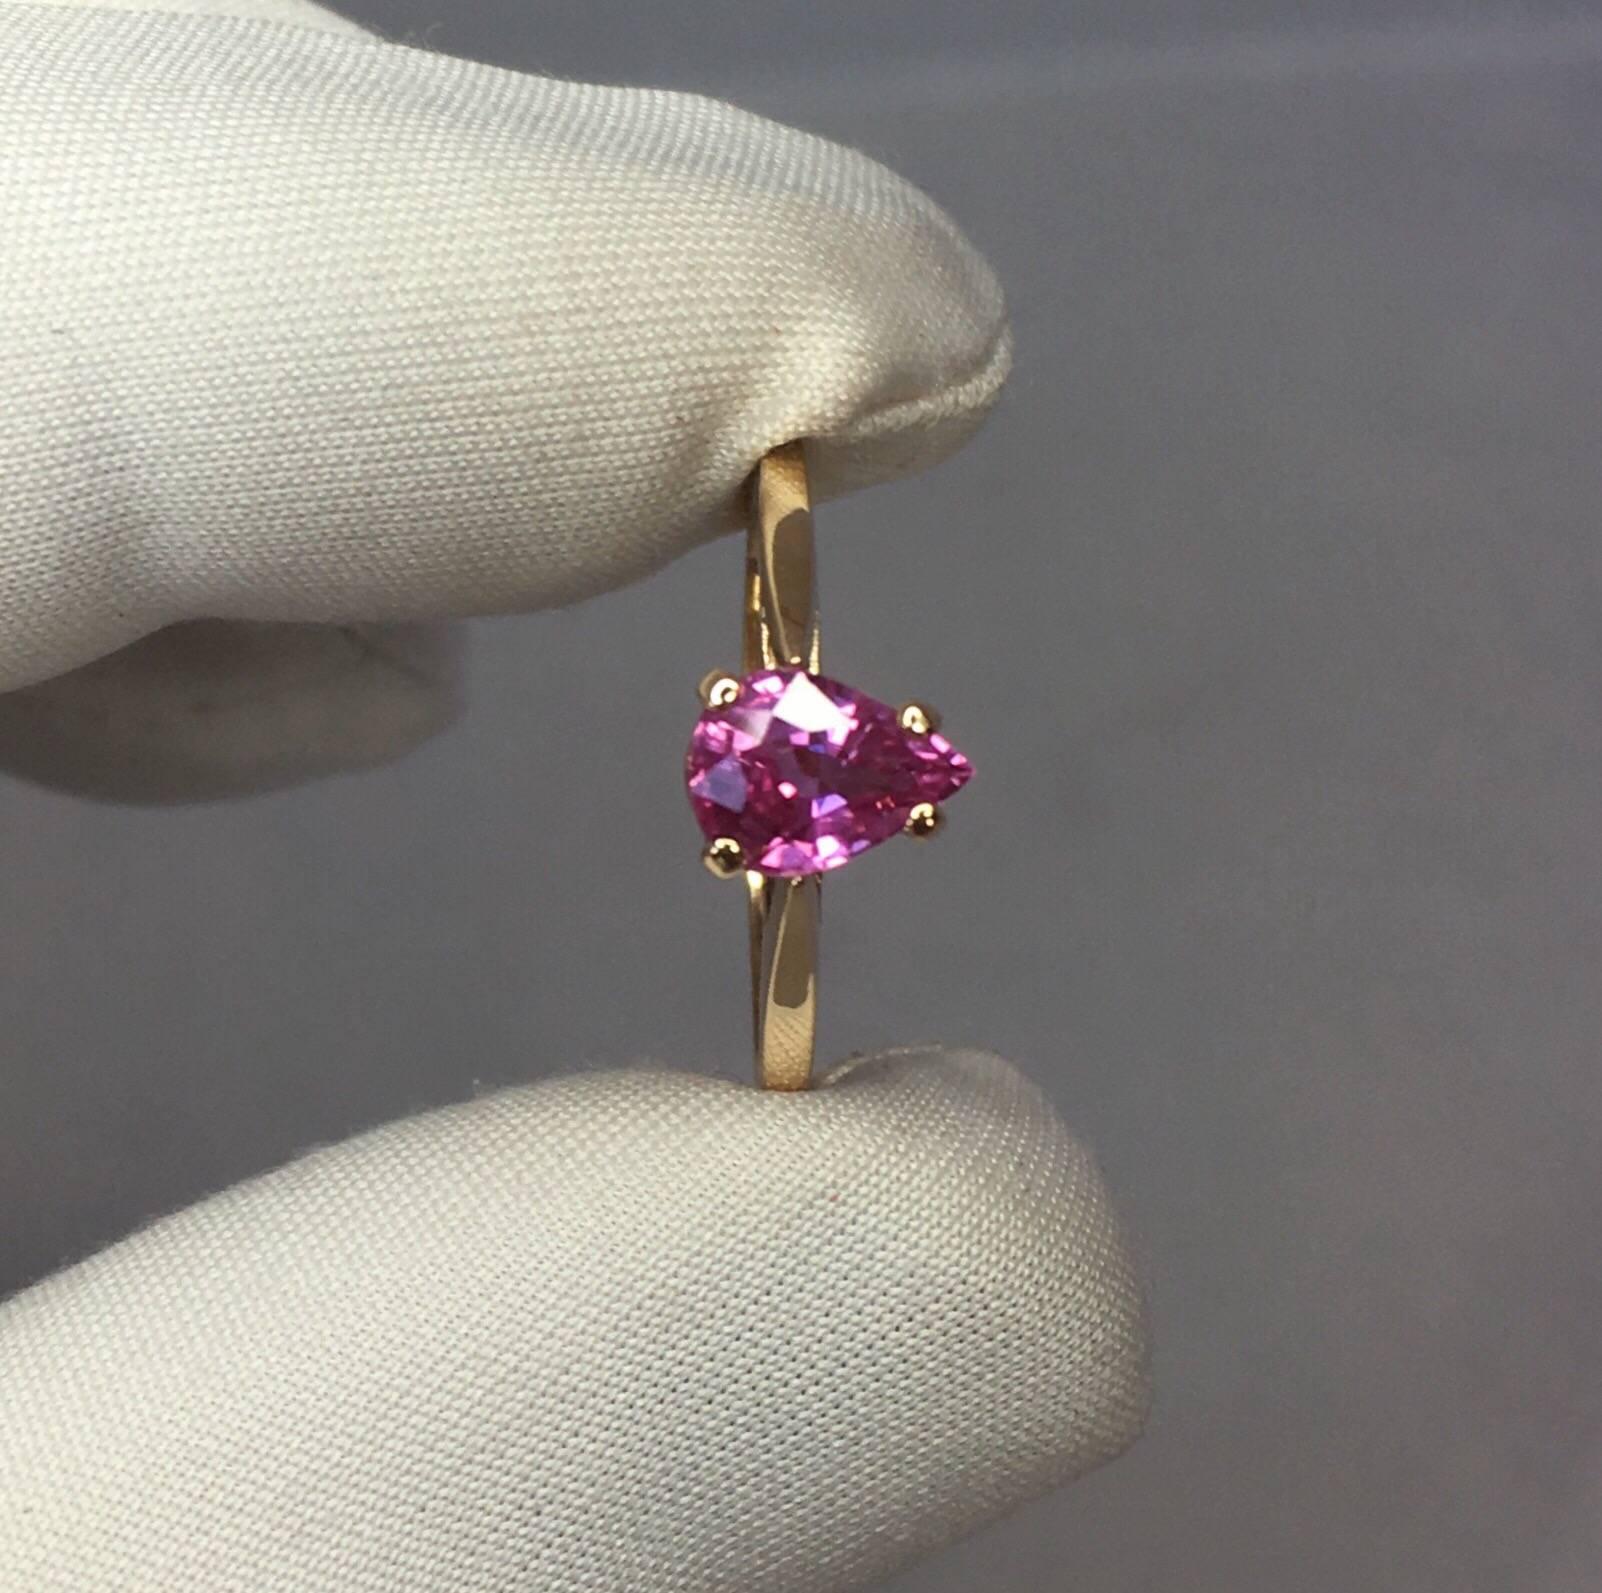 Stunning vivid purplish pink sapphire set in a fine 14k yellow gold solitaire ring.

Totally untreated and unheated, comes with full IGI report to confirm stone as natural and untreated. 

1.05 carat sapphire with stunning colour, very bright and